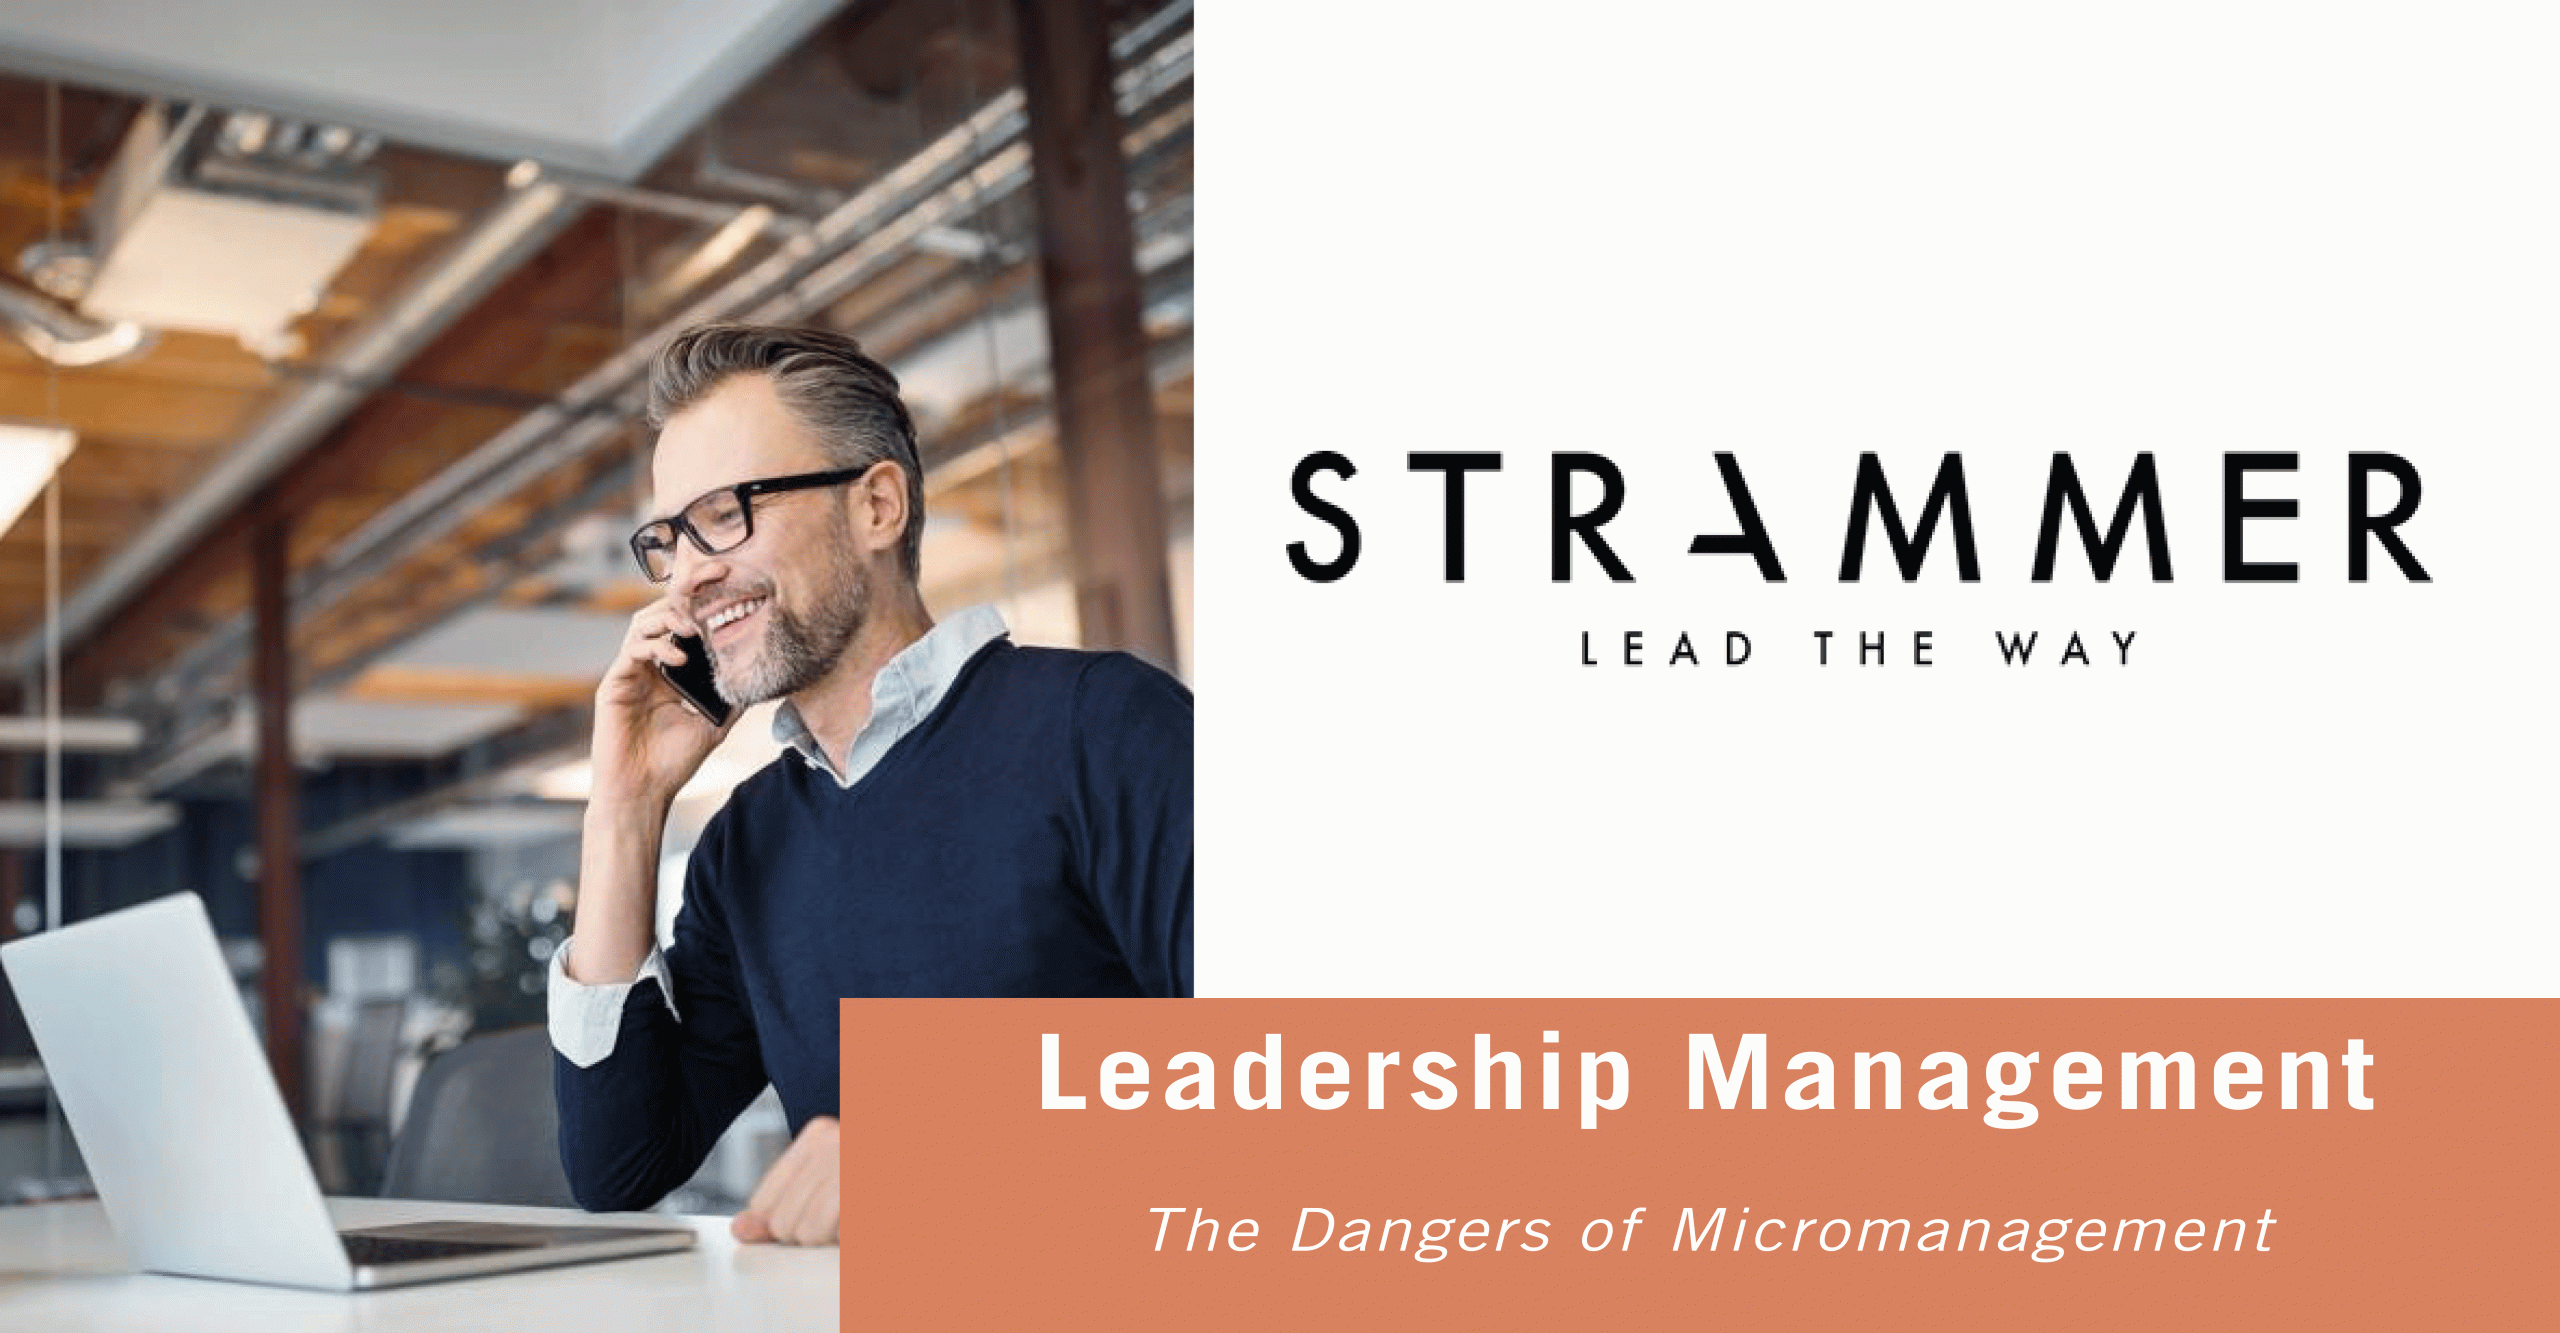 The Dangers of Micromanagement